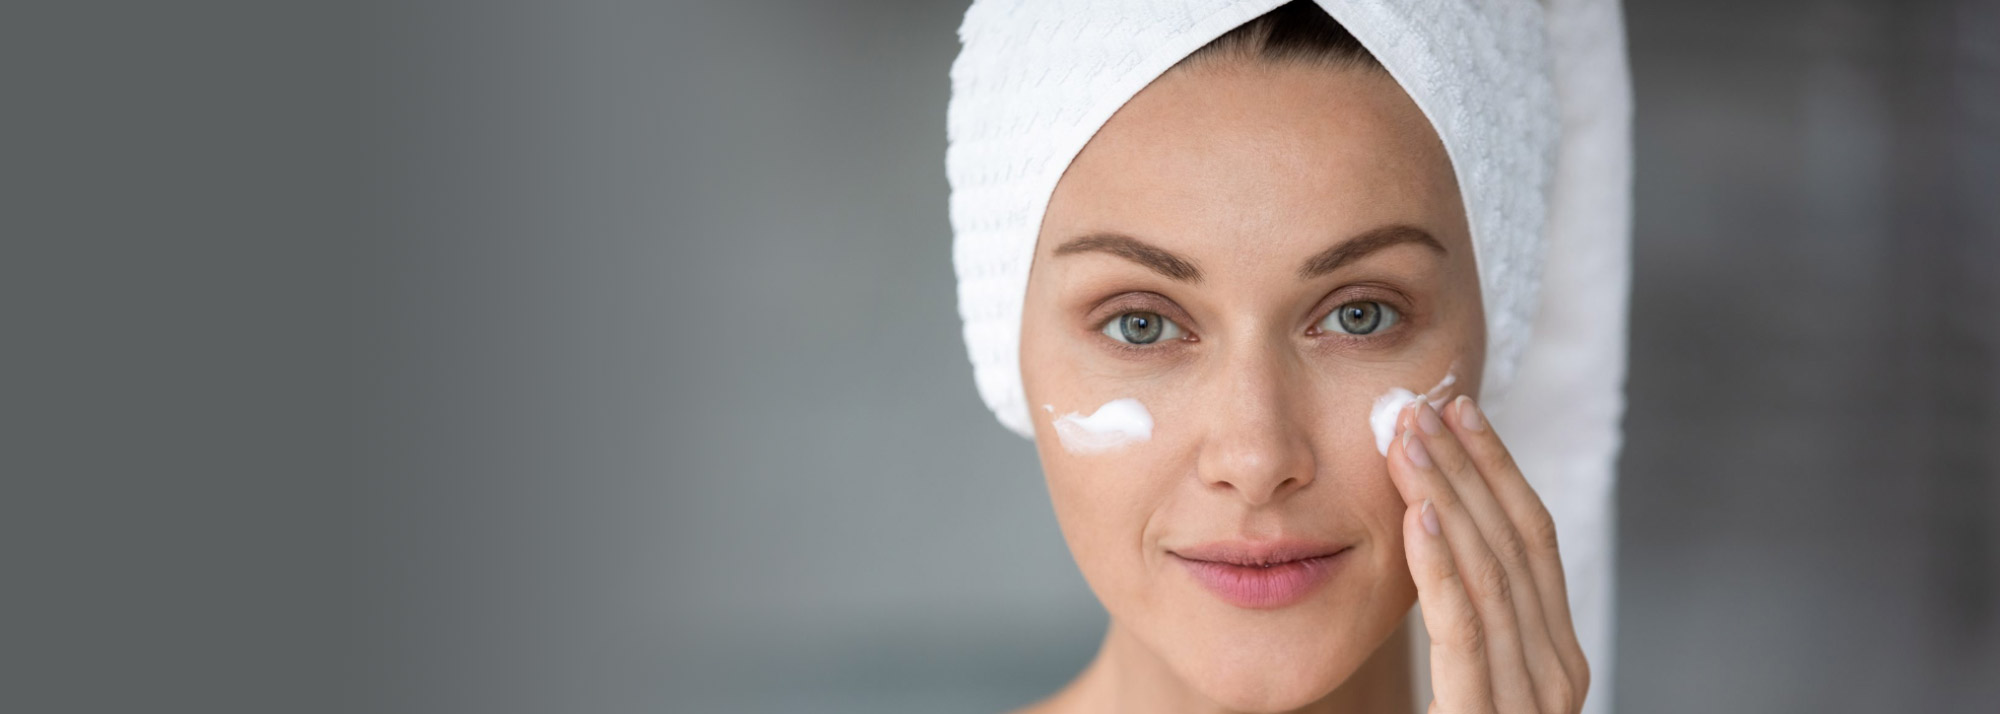 The Holy Grail of Age-Defying Skin Care